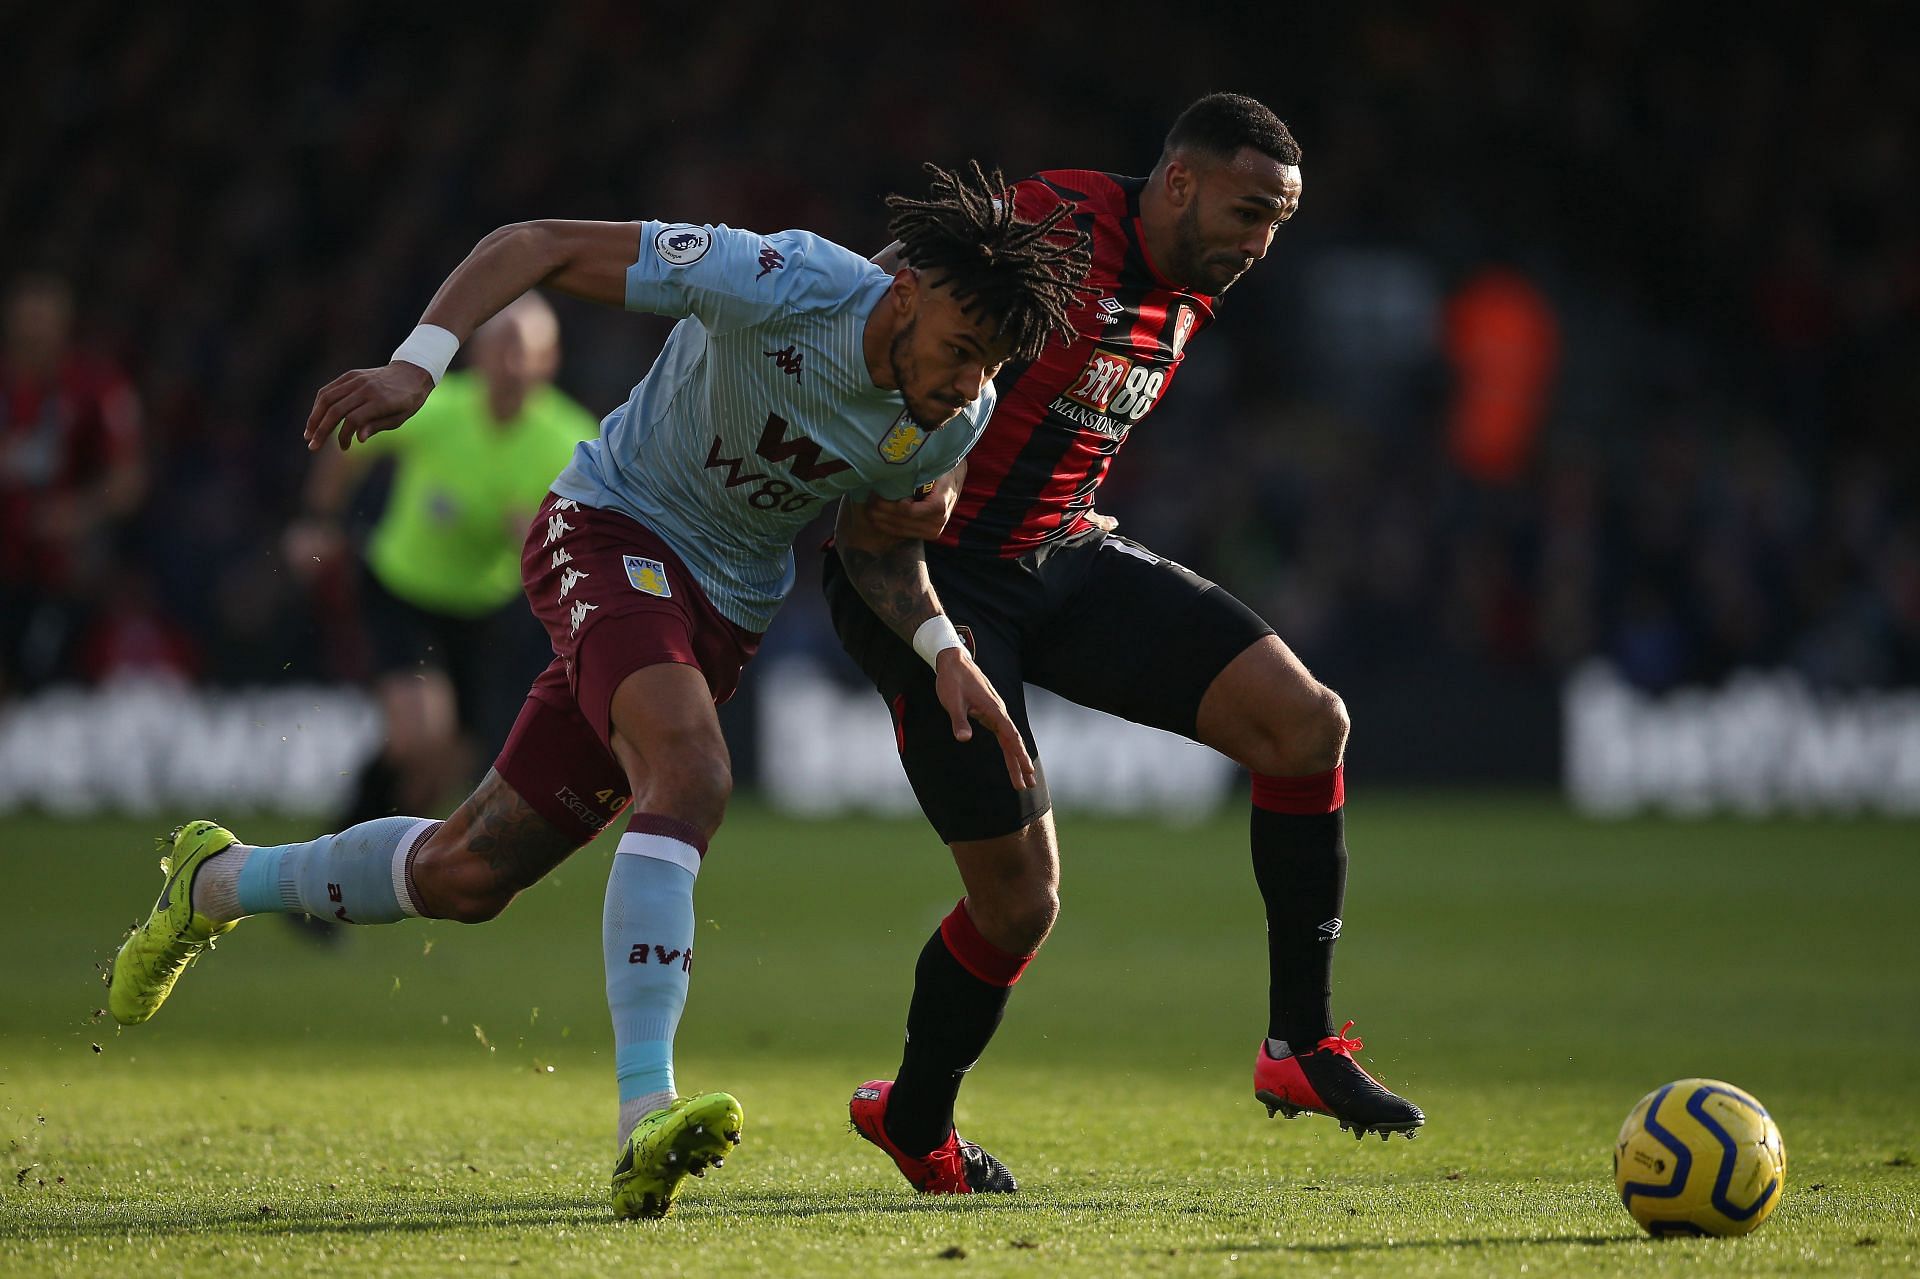 Bournemouth and Aston Villa will square off in their Premier League opener on Saturday.